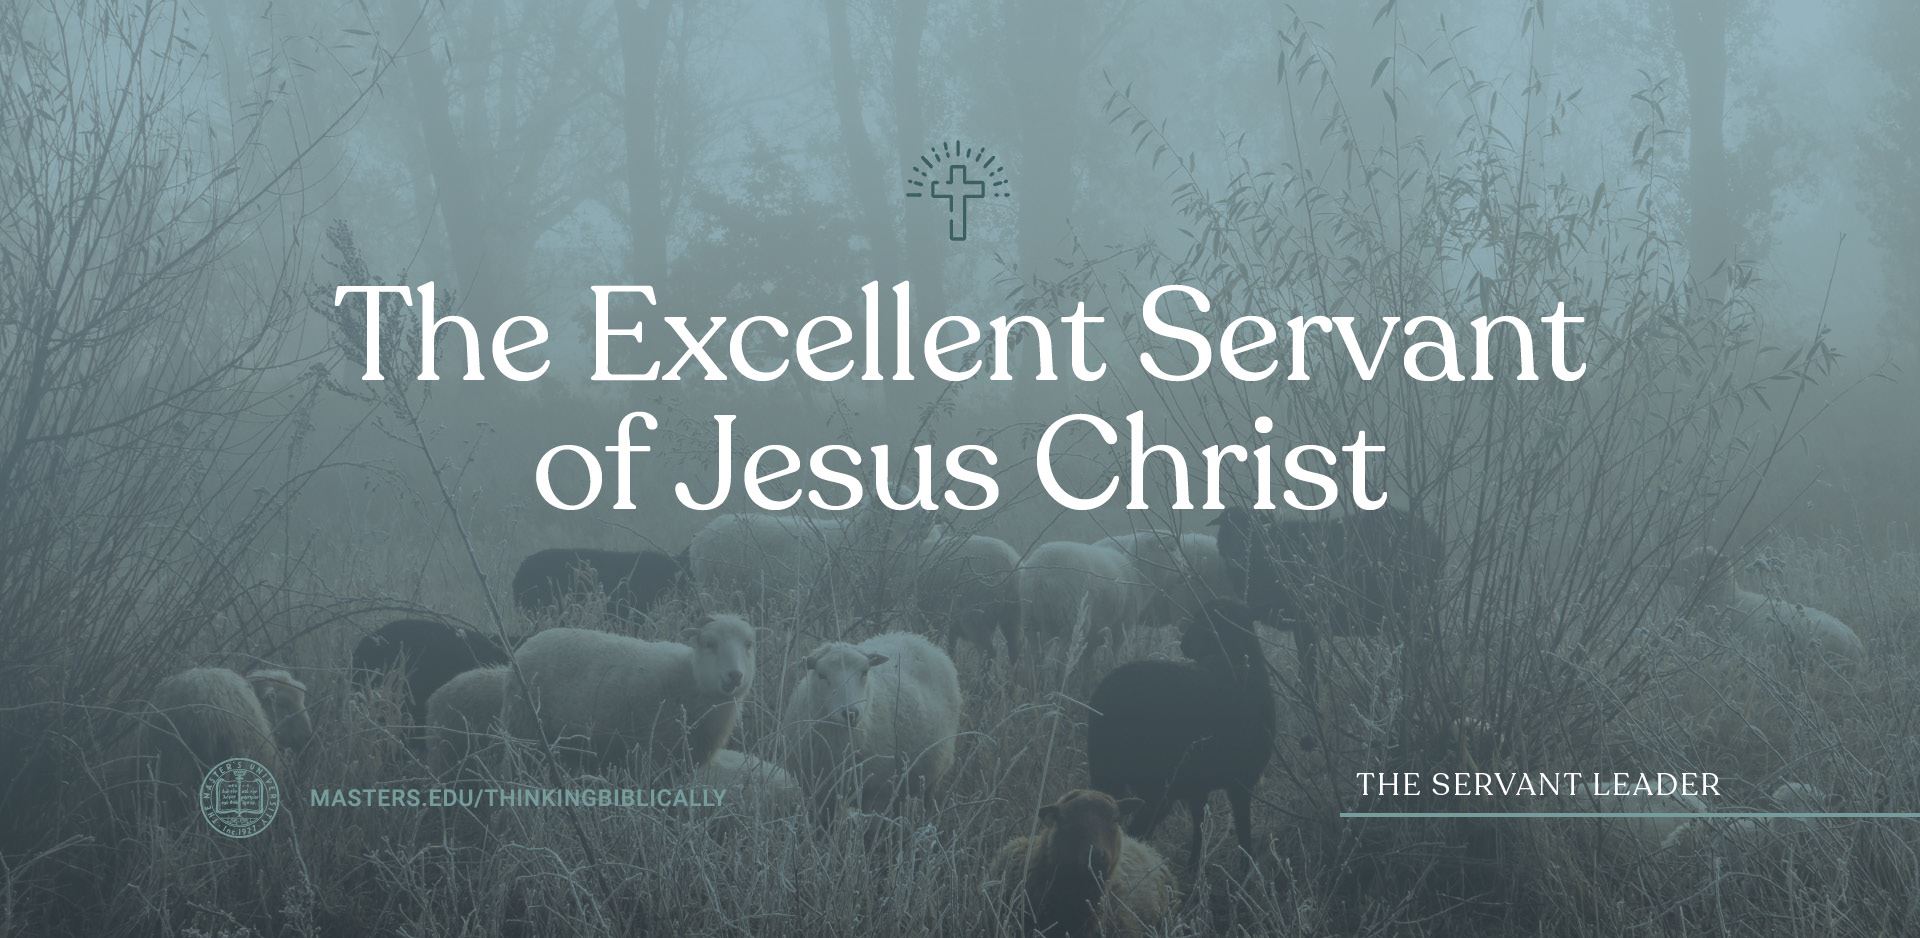 The Excellent Servant of Jesus Christ Featured Image